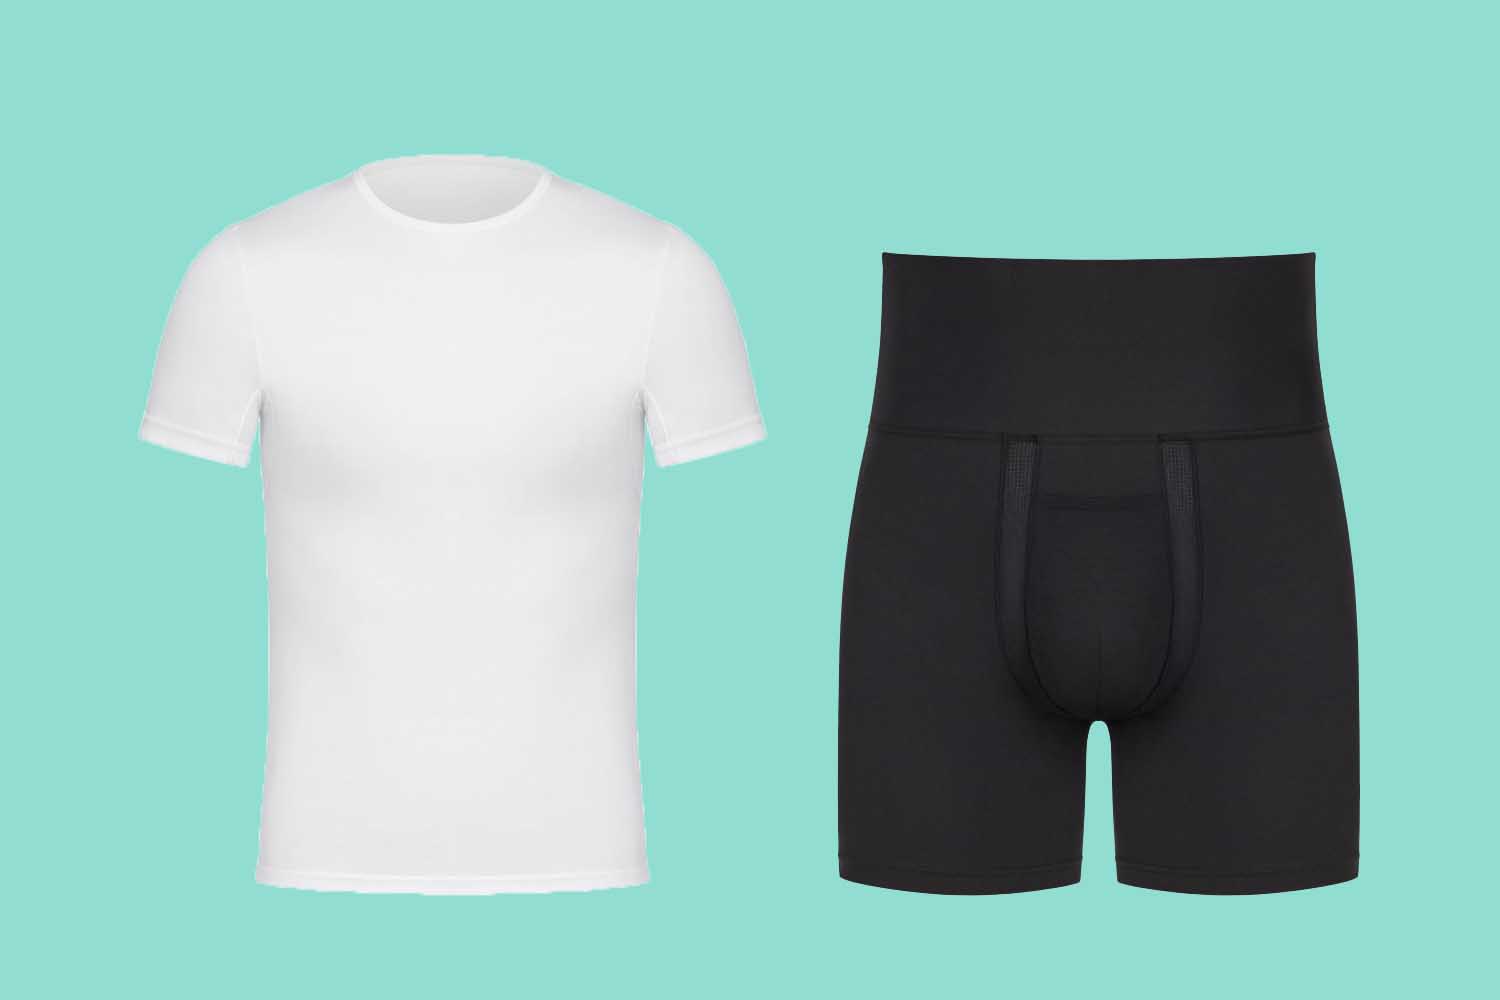 Spanx Now Makes Products for Men, Too - InsideHook